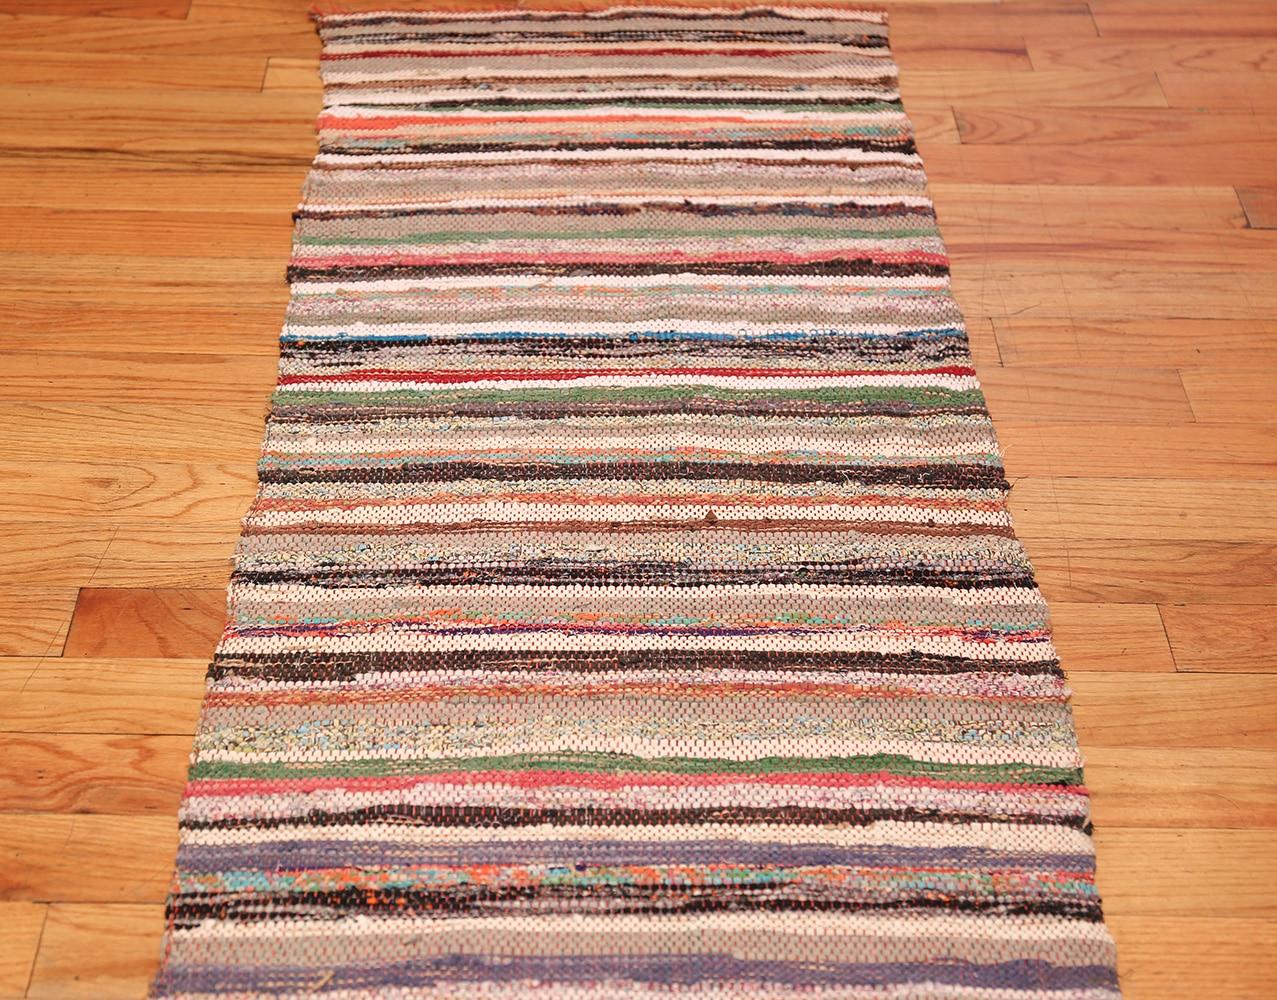 Vintage Swedish Scandinavian Runner rag rug, country of origin: Sweden, date circa mid-20th century. Size: 2 ft. x 6 ft. 4 in (0.61 m x 1.93 m). Bright color and a striking multihued abstract pattern ensure this delightful work is a bold and